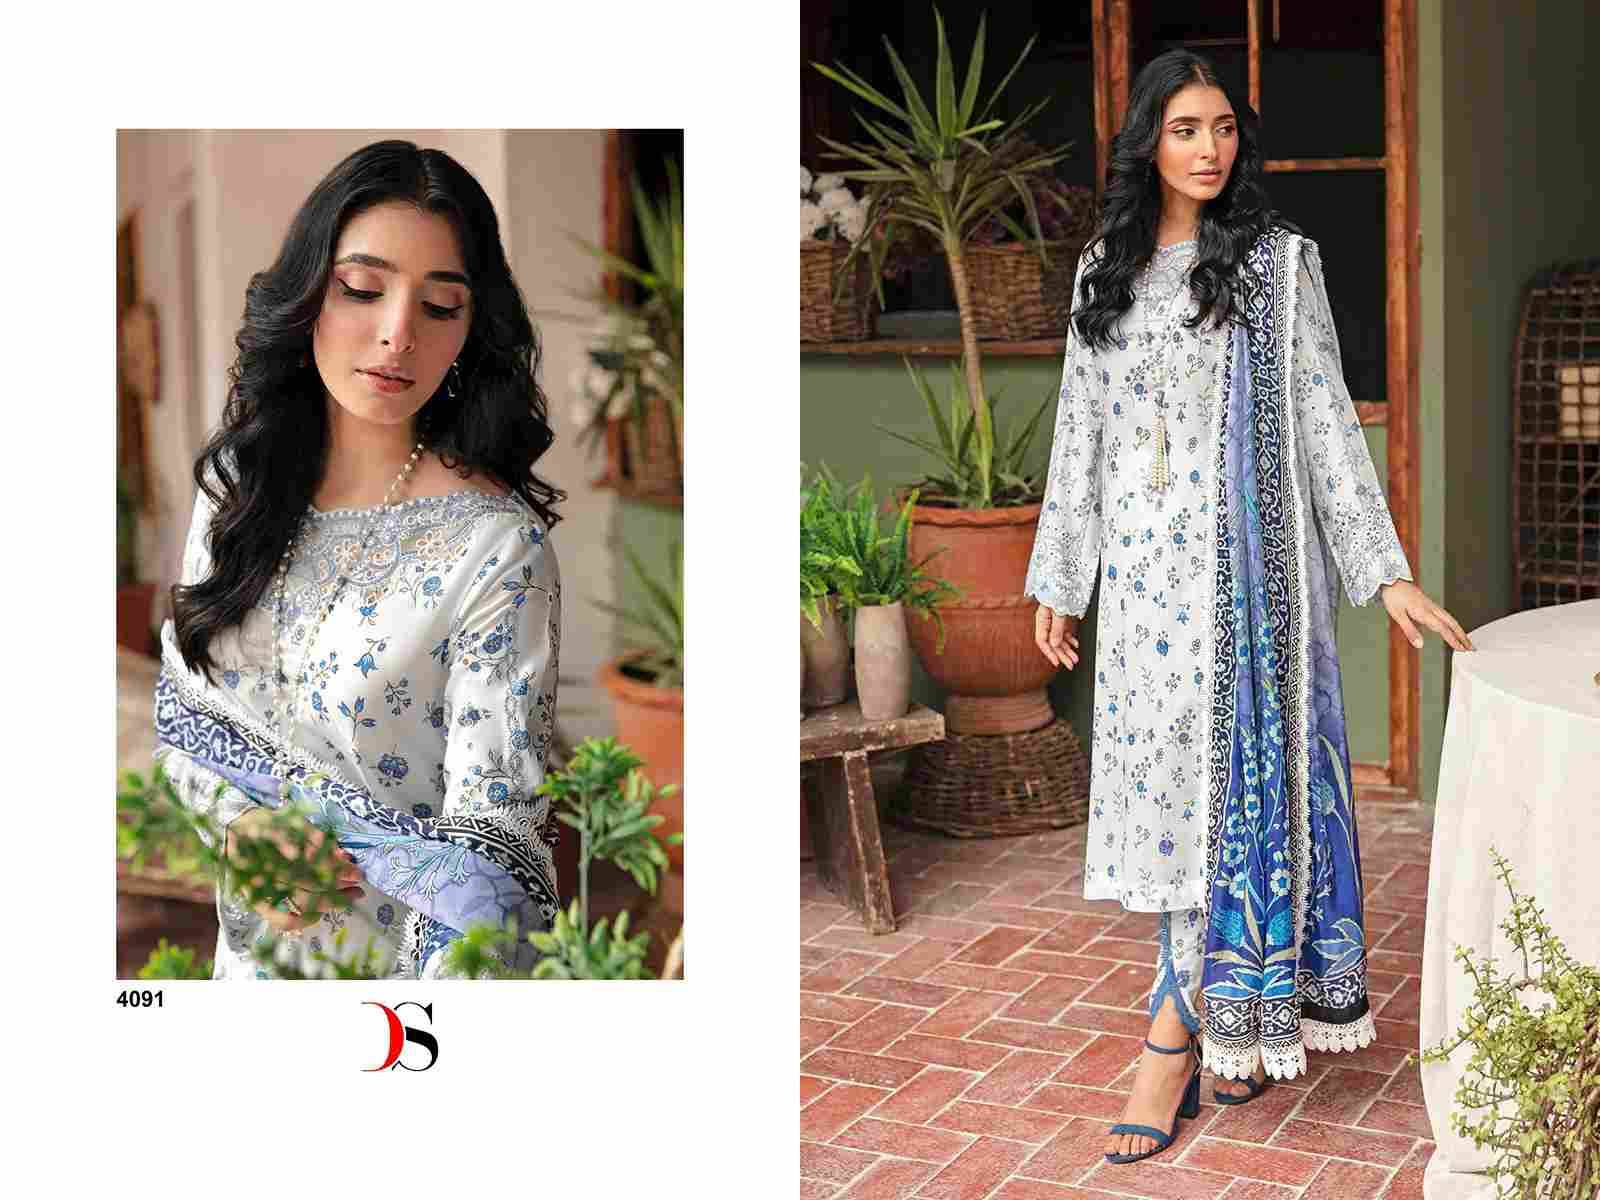 Ramsha Rangrez Luxury Lawn-24 By Deepsy Suits 4091 To 4097 Series Designer Pakistani Suits Beautiful Stylish Fancy Colorful Party Wear & Occasional Wear Pure Cotton Dresses At Wholesale Price